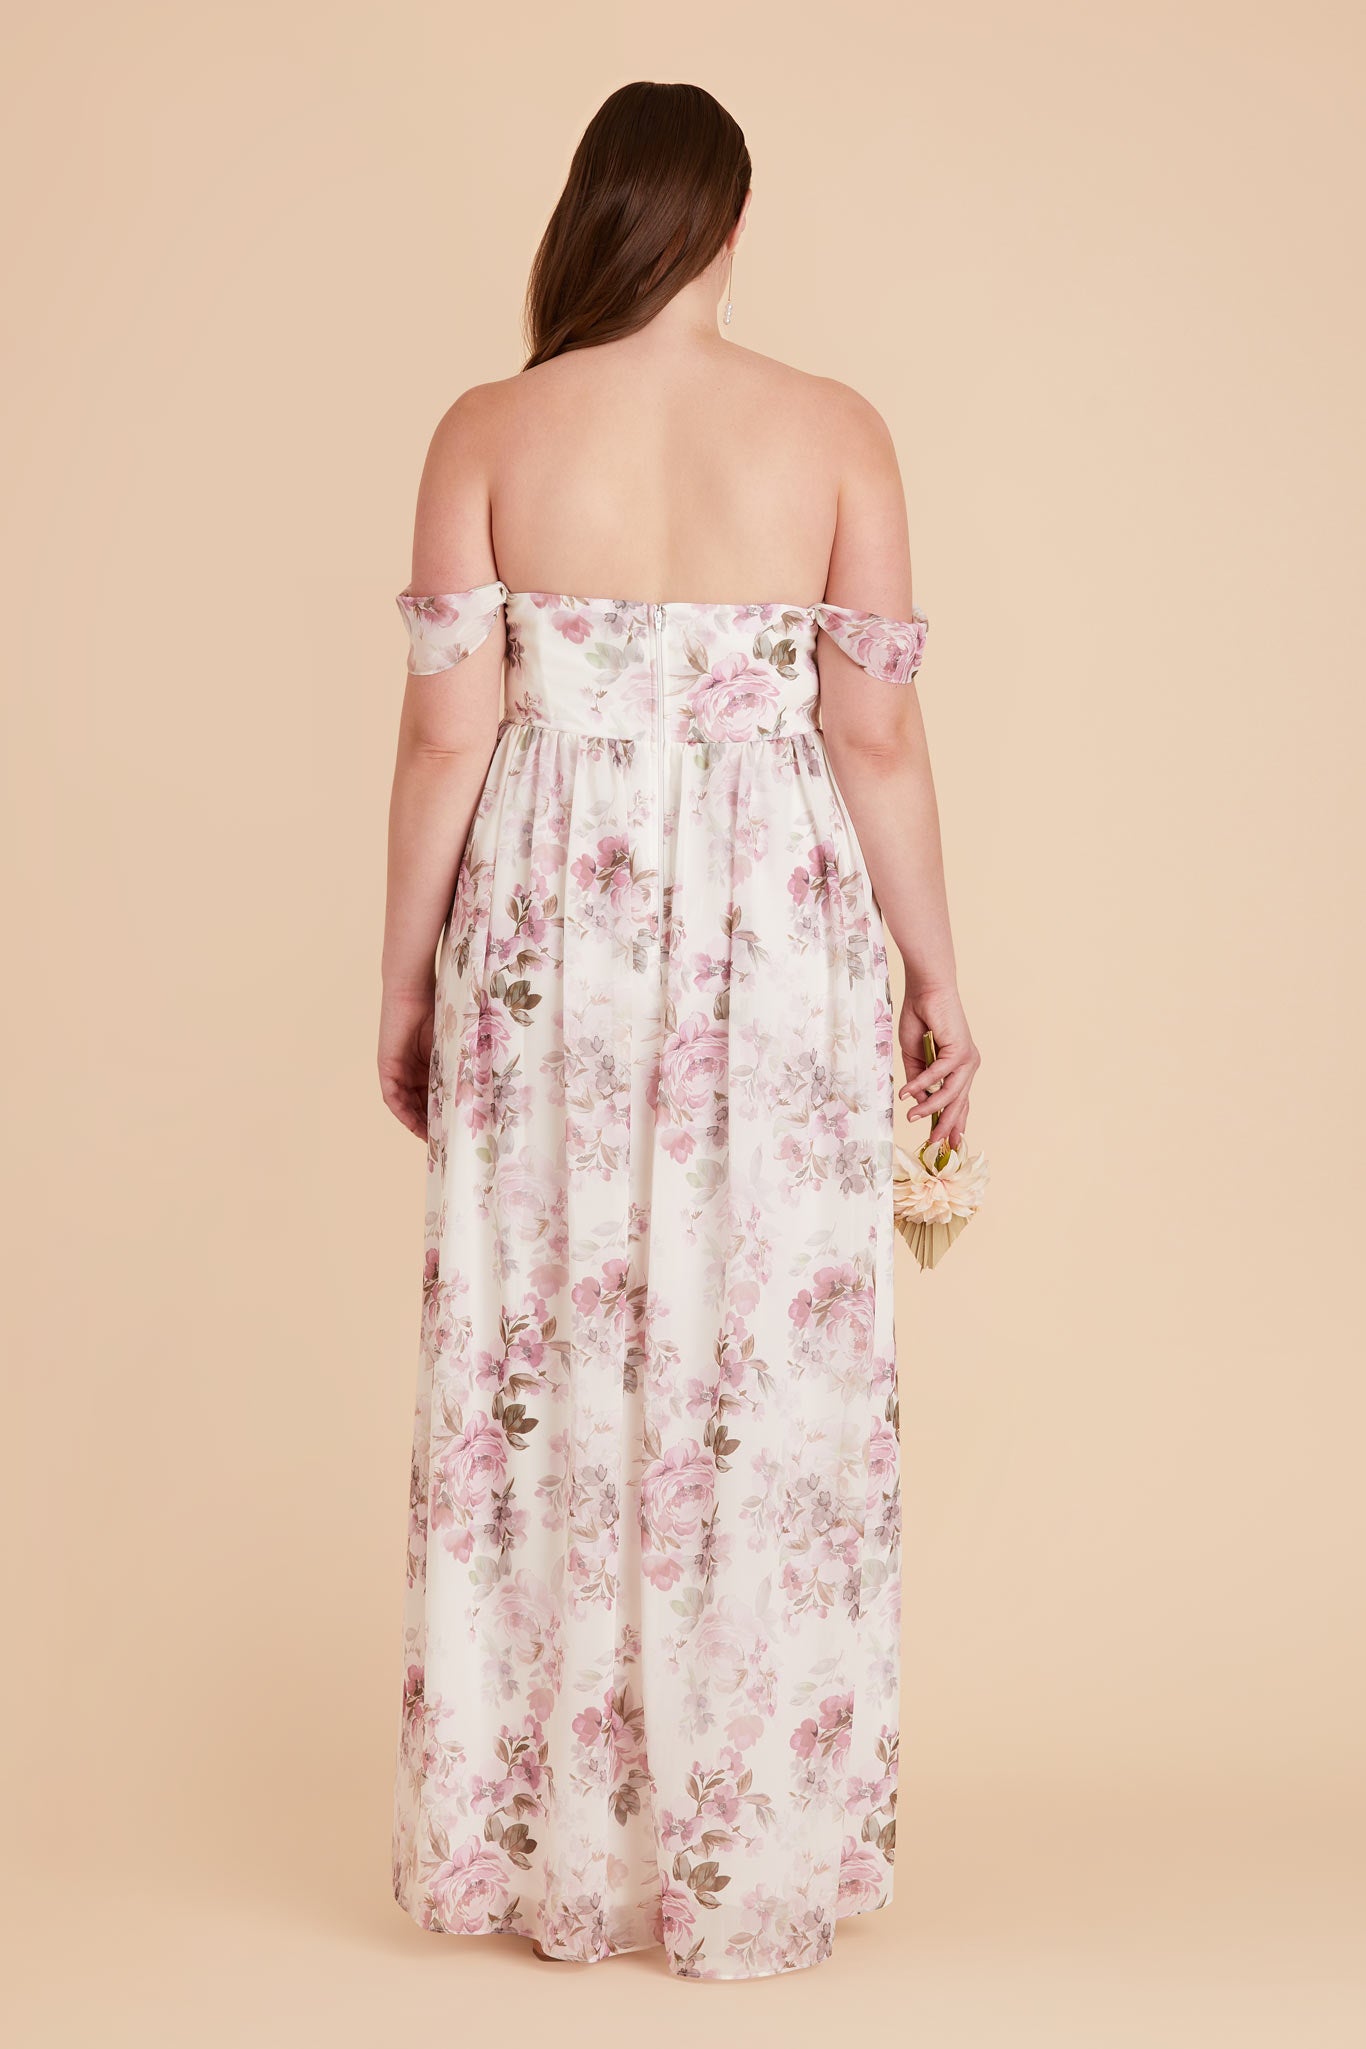 Dusty Pink Peonies August Convertible Dress by Birdy Grey